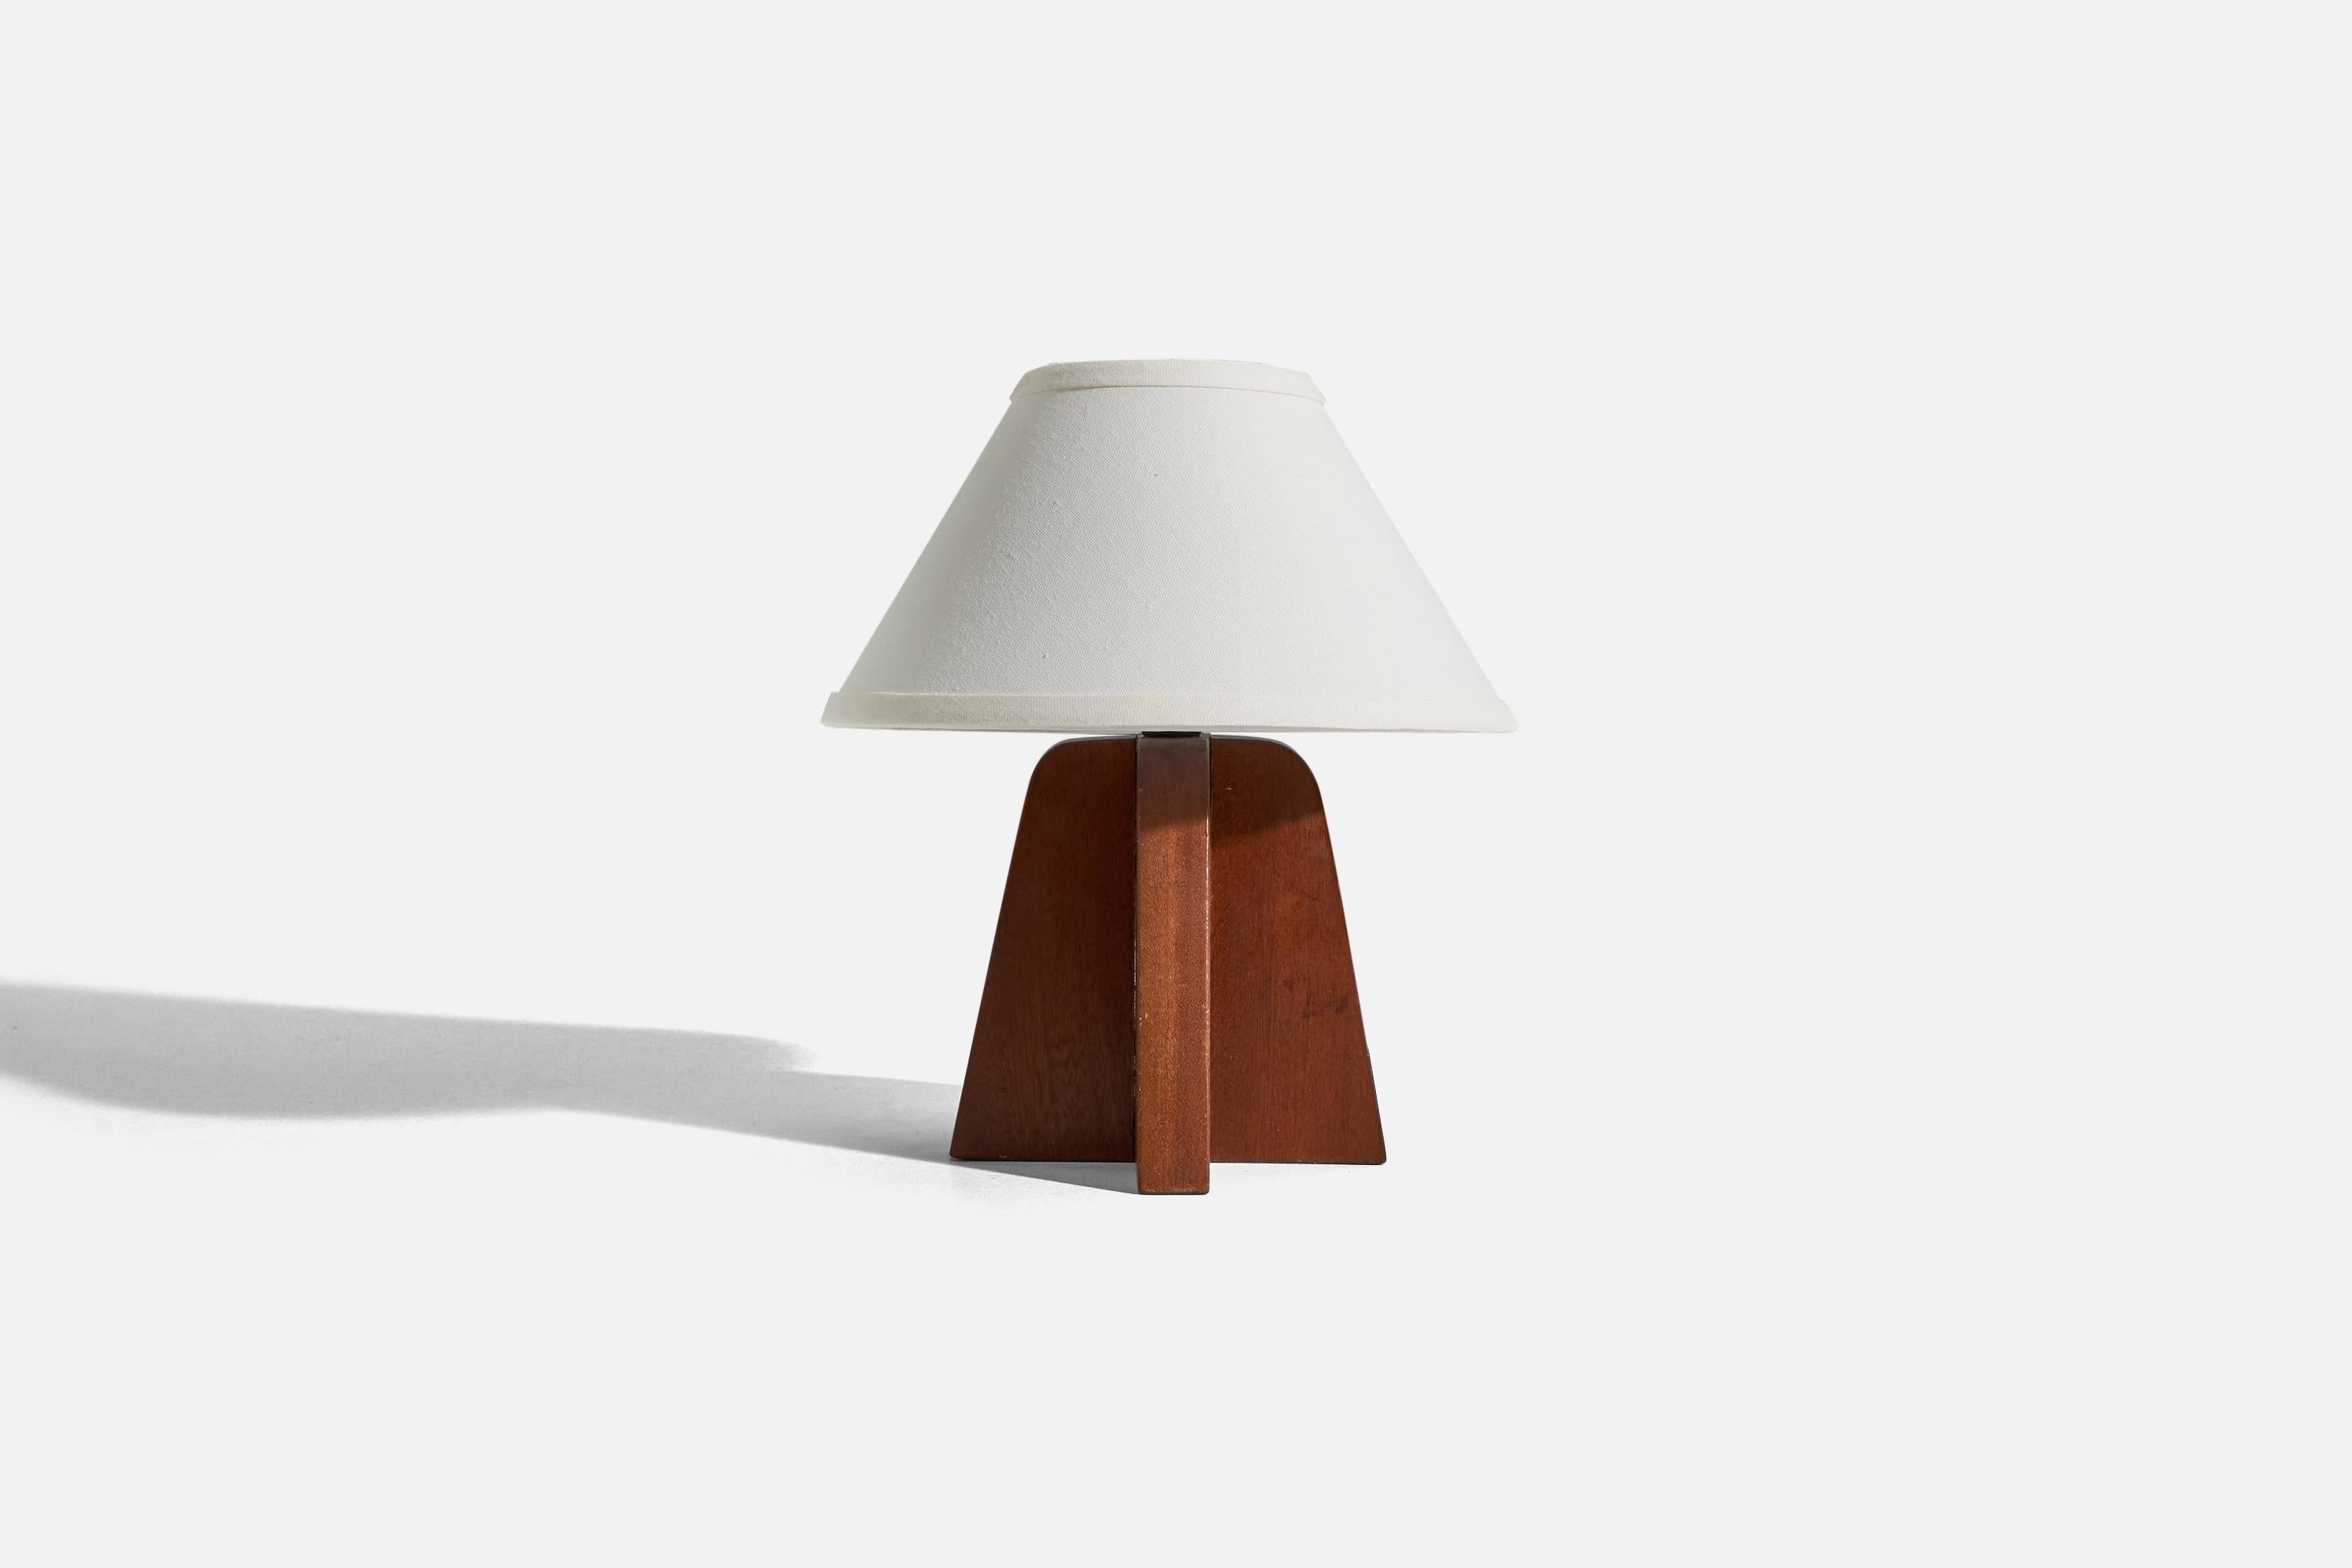 A teak table lamp designed and produced in Sweden, c. 1960s. 

Sold without lampshade. 
Dimensions of Lamp (inches) : 8.6875 x 6.5 x 7 (H x W x D)
Dimensions of Shade (inches) : 4.5 x 10.25 x 6 (T x B x H)
Dimension of Lamp with Shade (inches)